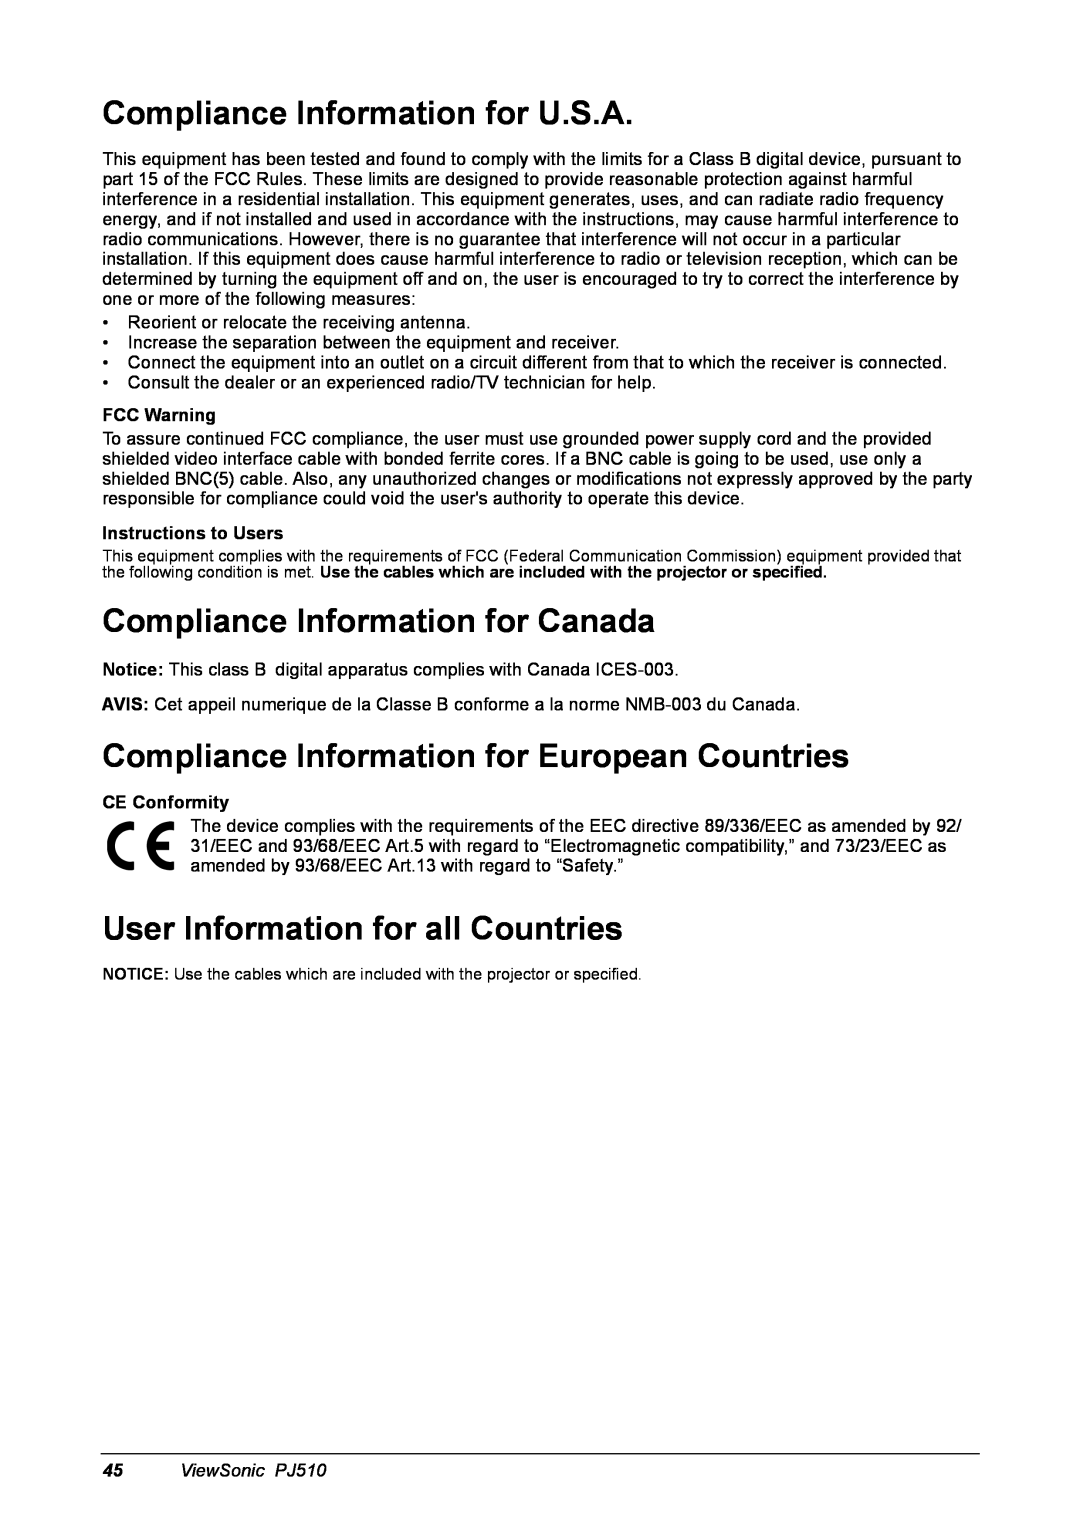 ViewSonic PJ510 Compliance Information for U.S.A, Compliance Information for Canada, User Information for all Countries 